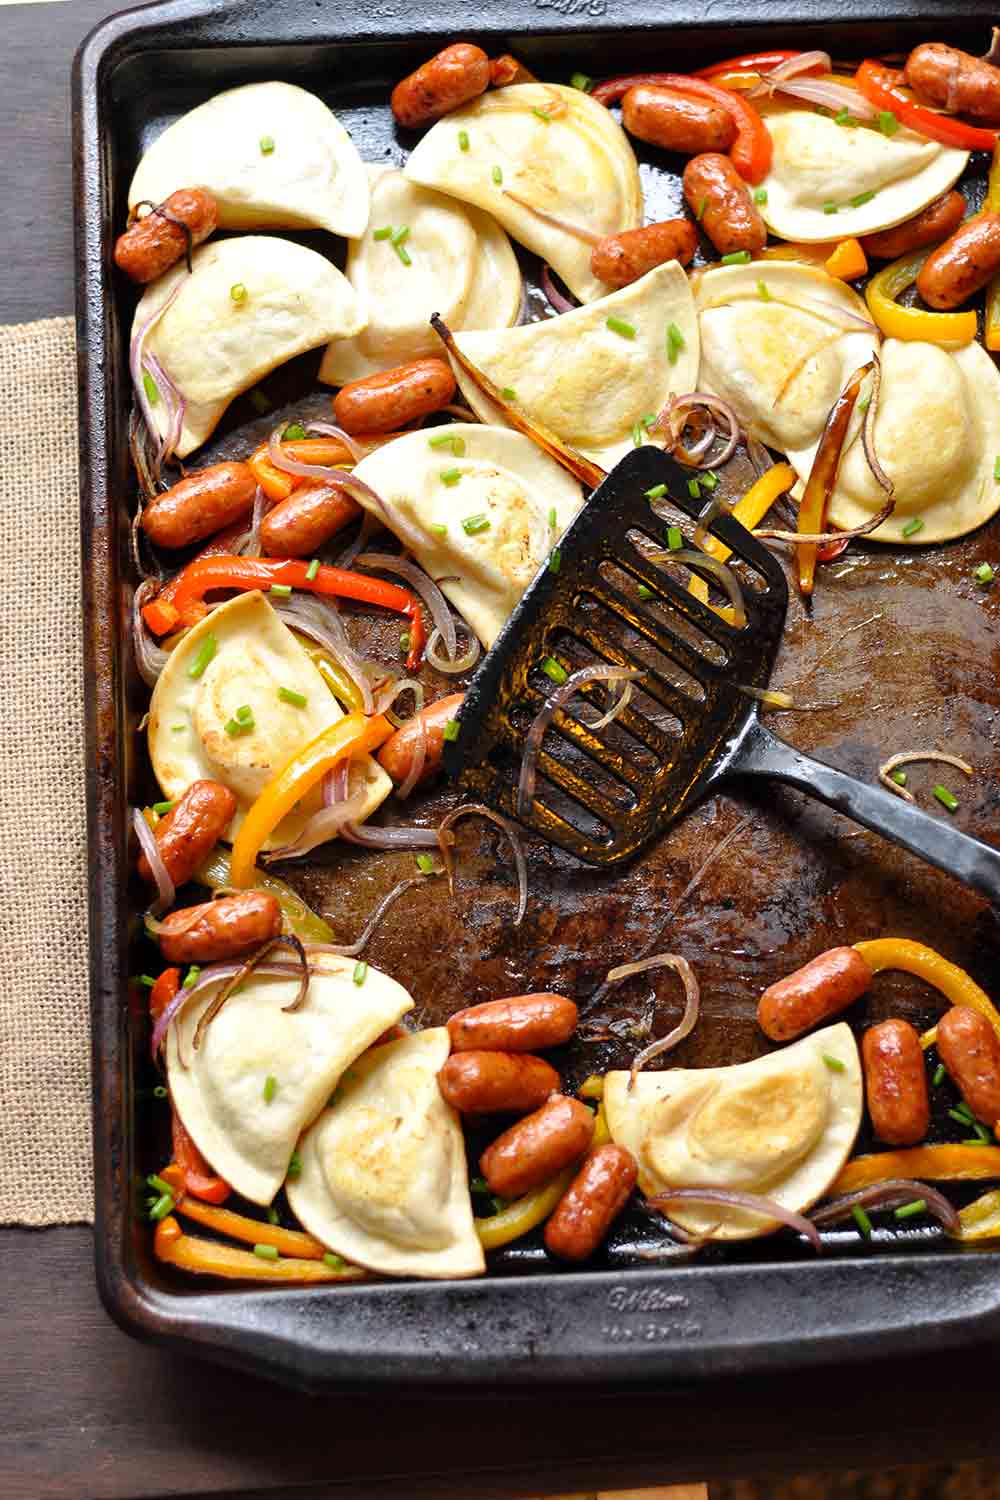 Pierogies and Kielbasa with Peppers and Onions Cook on Sheet Pan